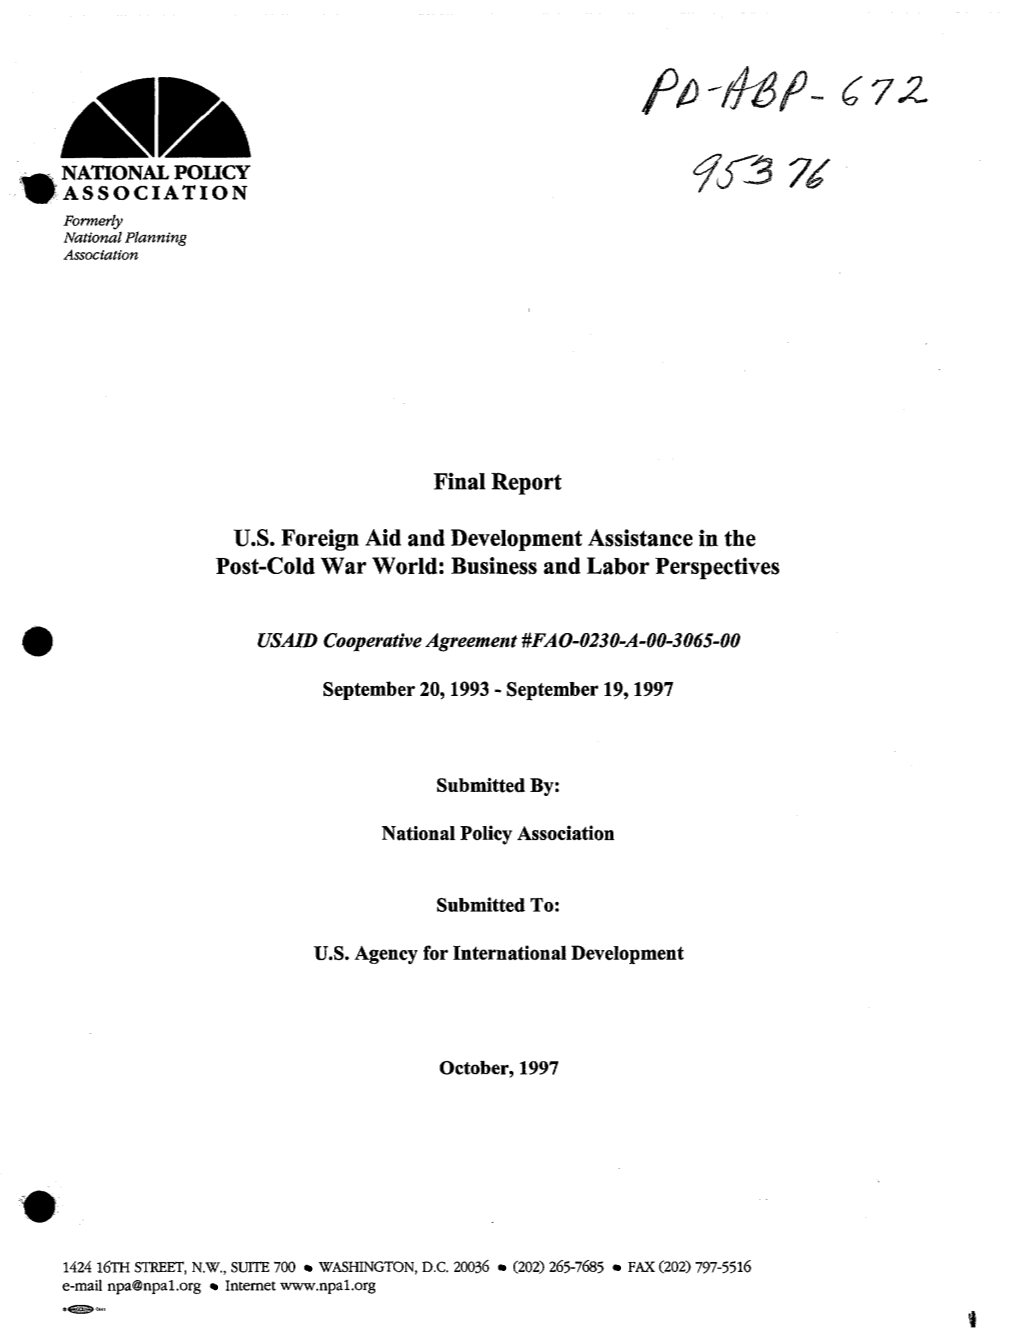 Final Report US Foreign Aid and Development Assistance In